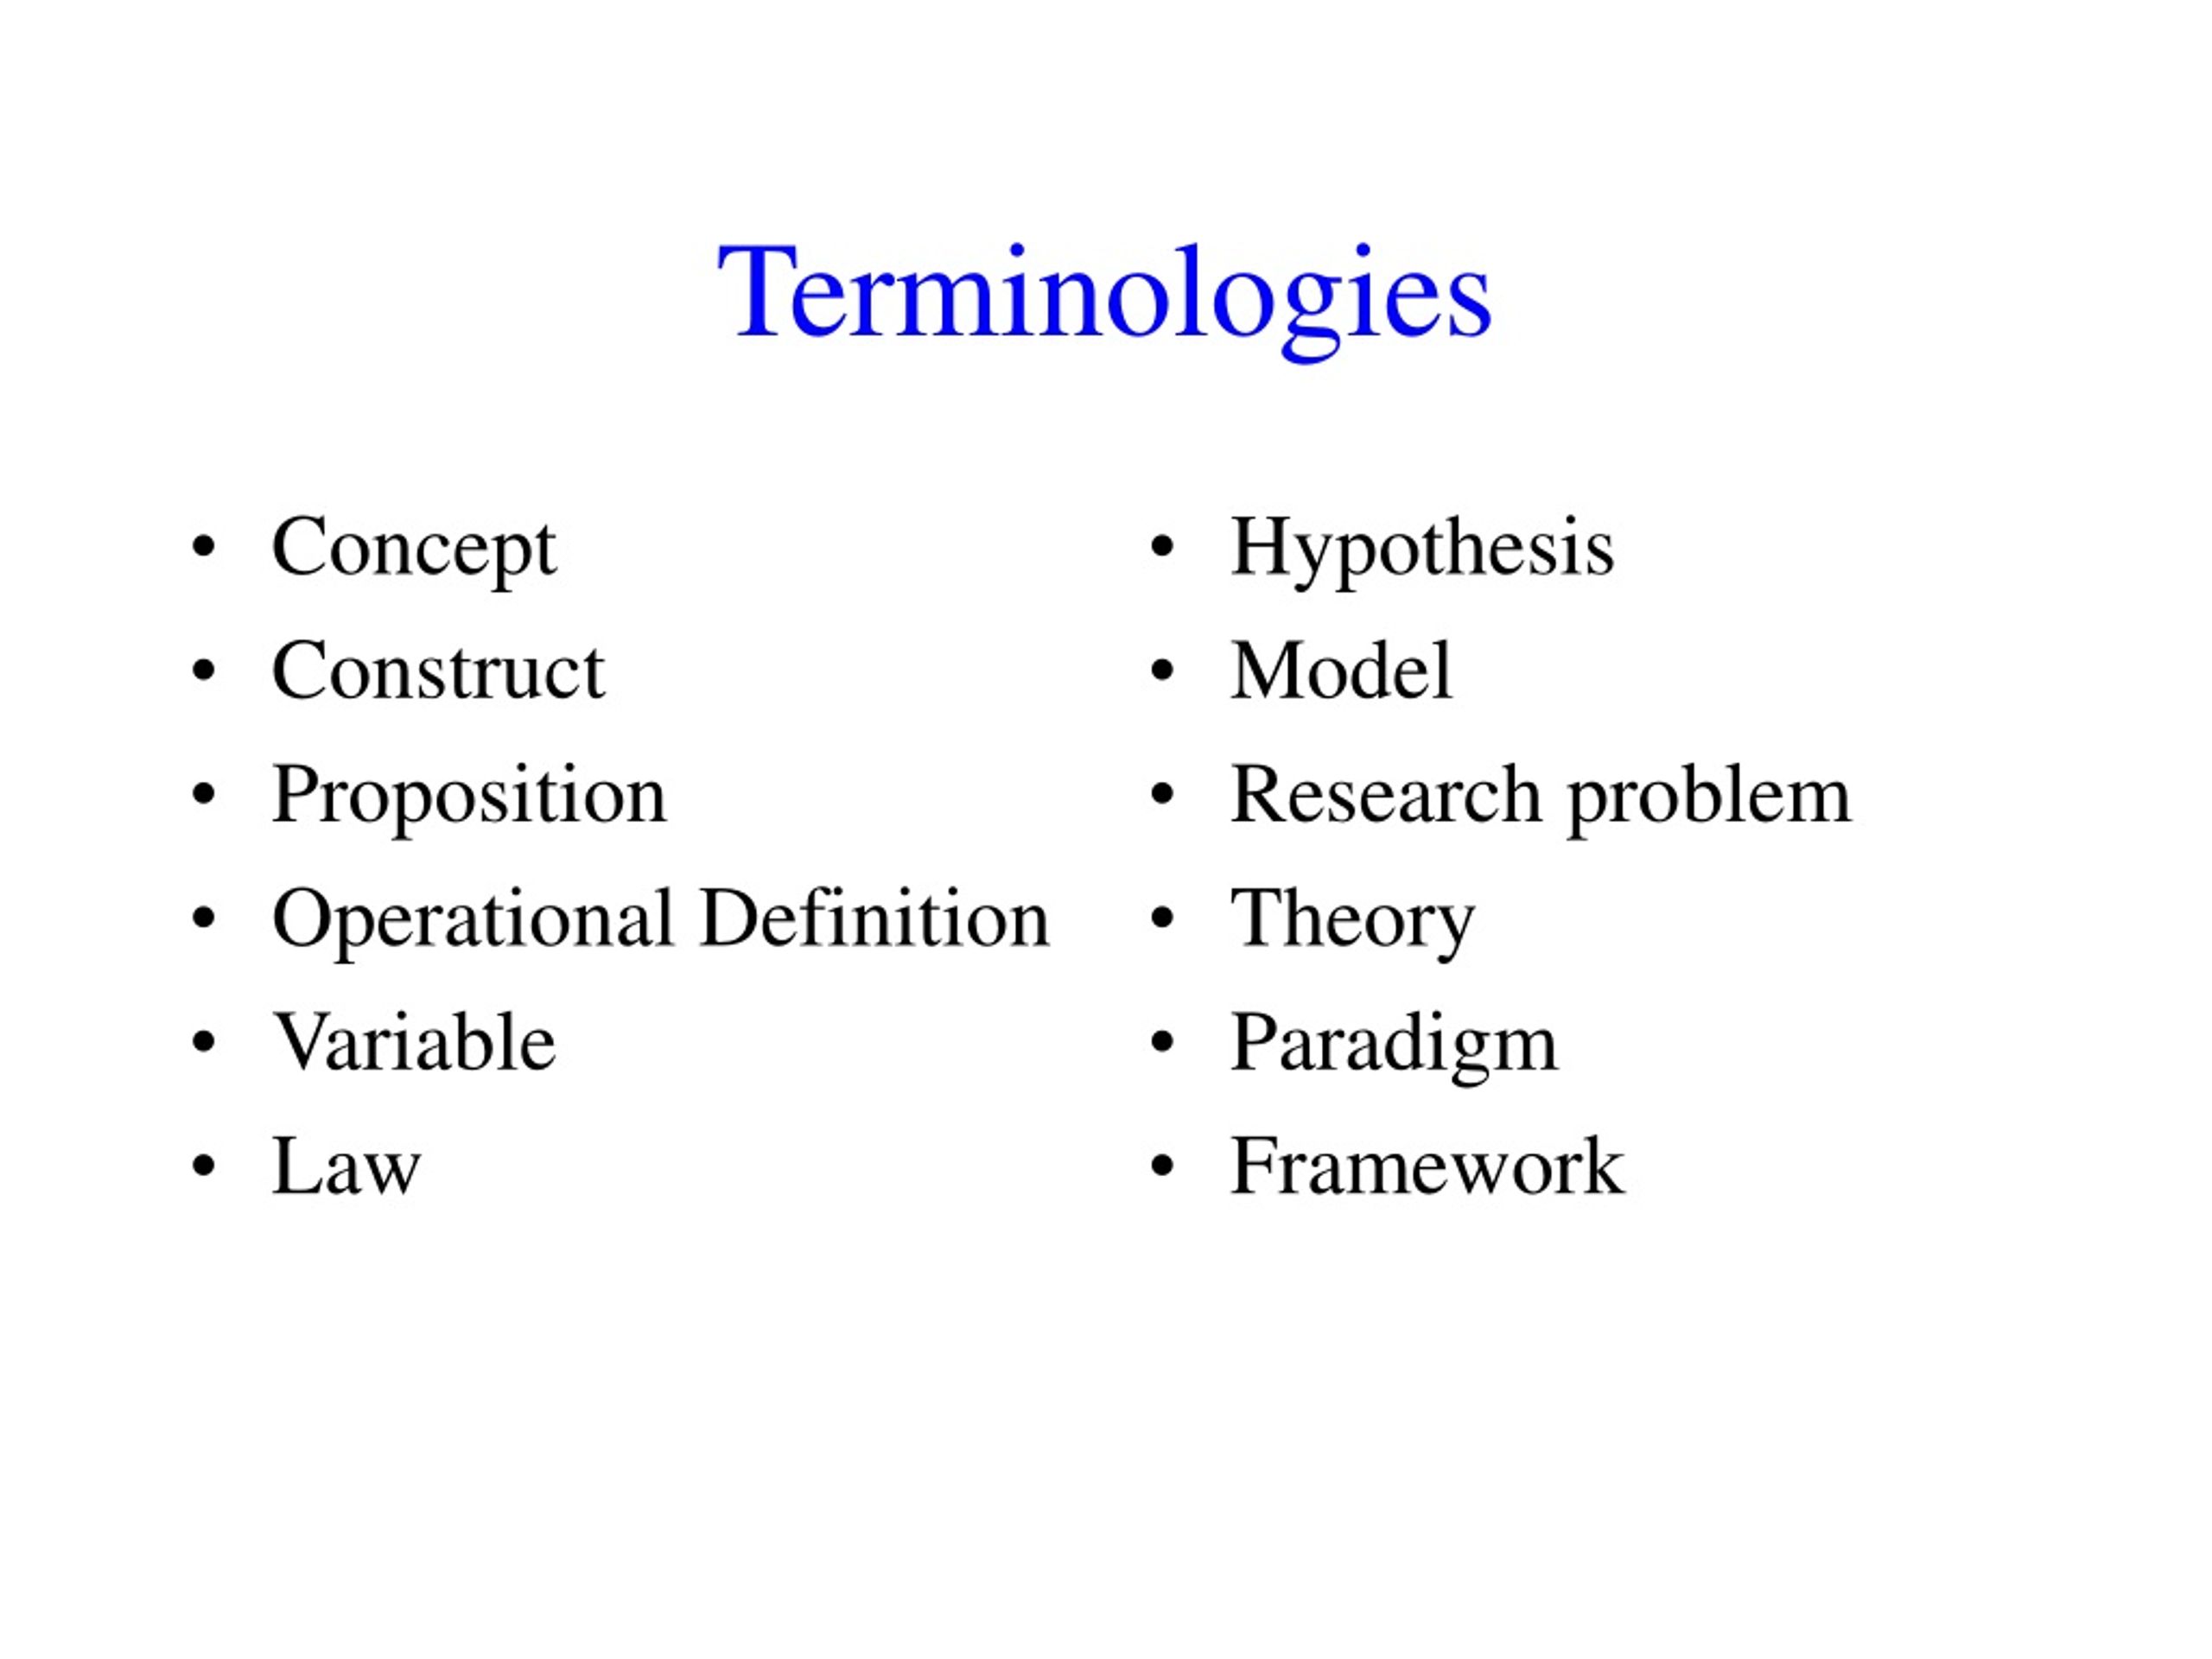 PPT - Terminologies for Research Methodology PowerPoint Presentation ...